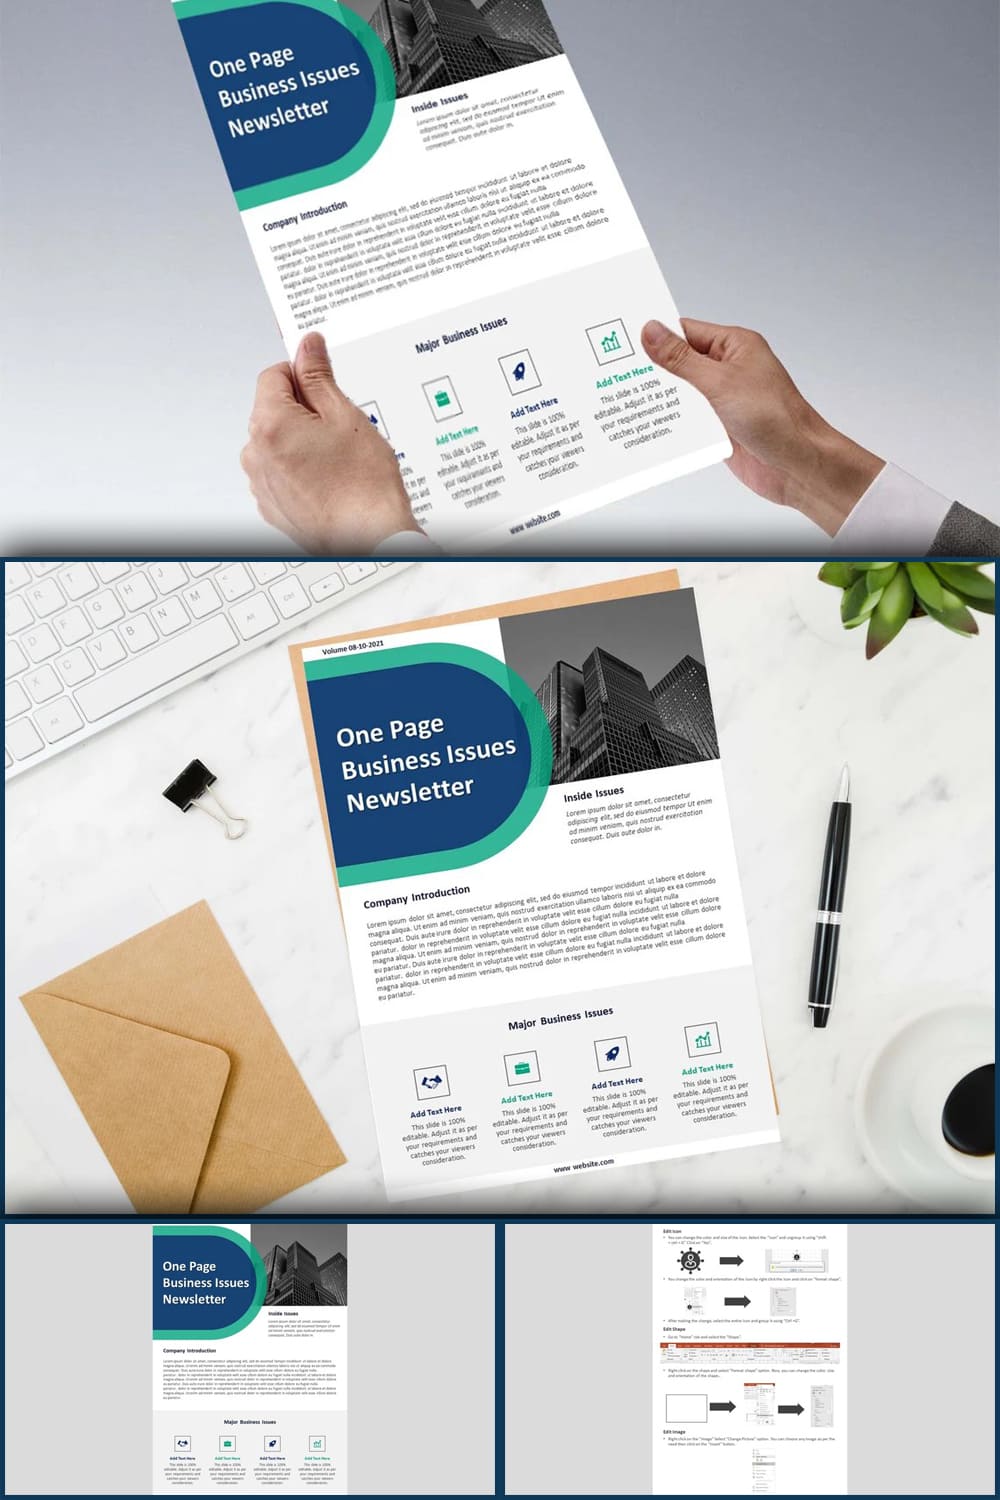 Image collection of amazing business newsletter presentation slide template.